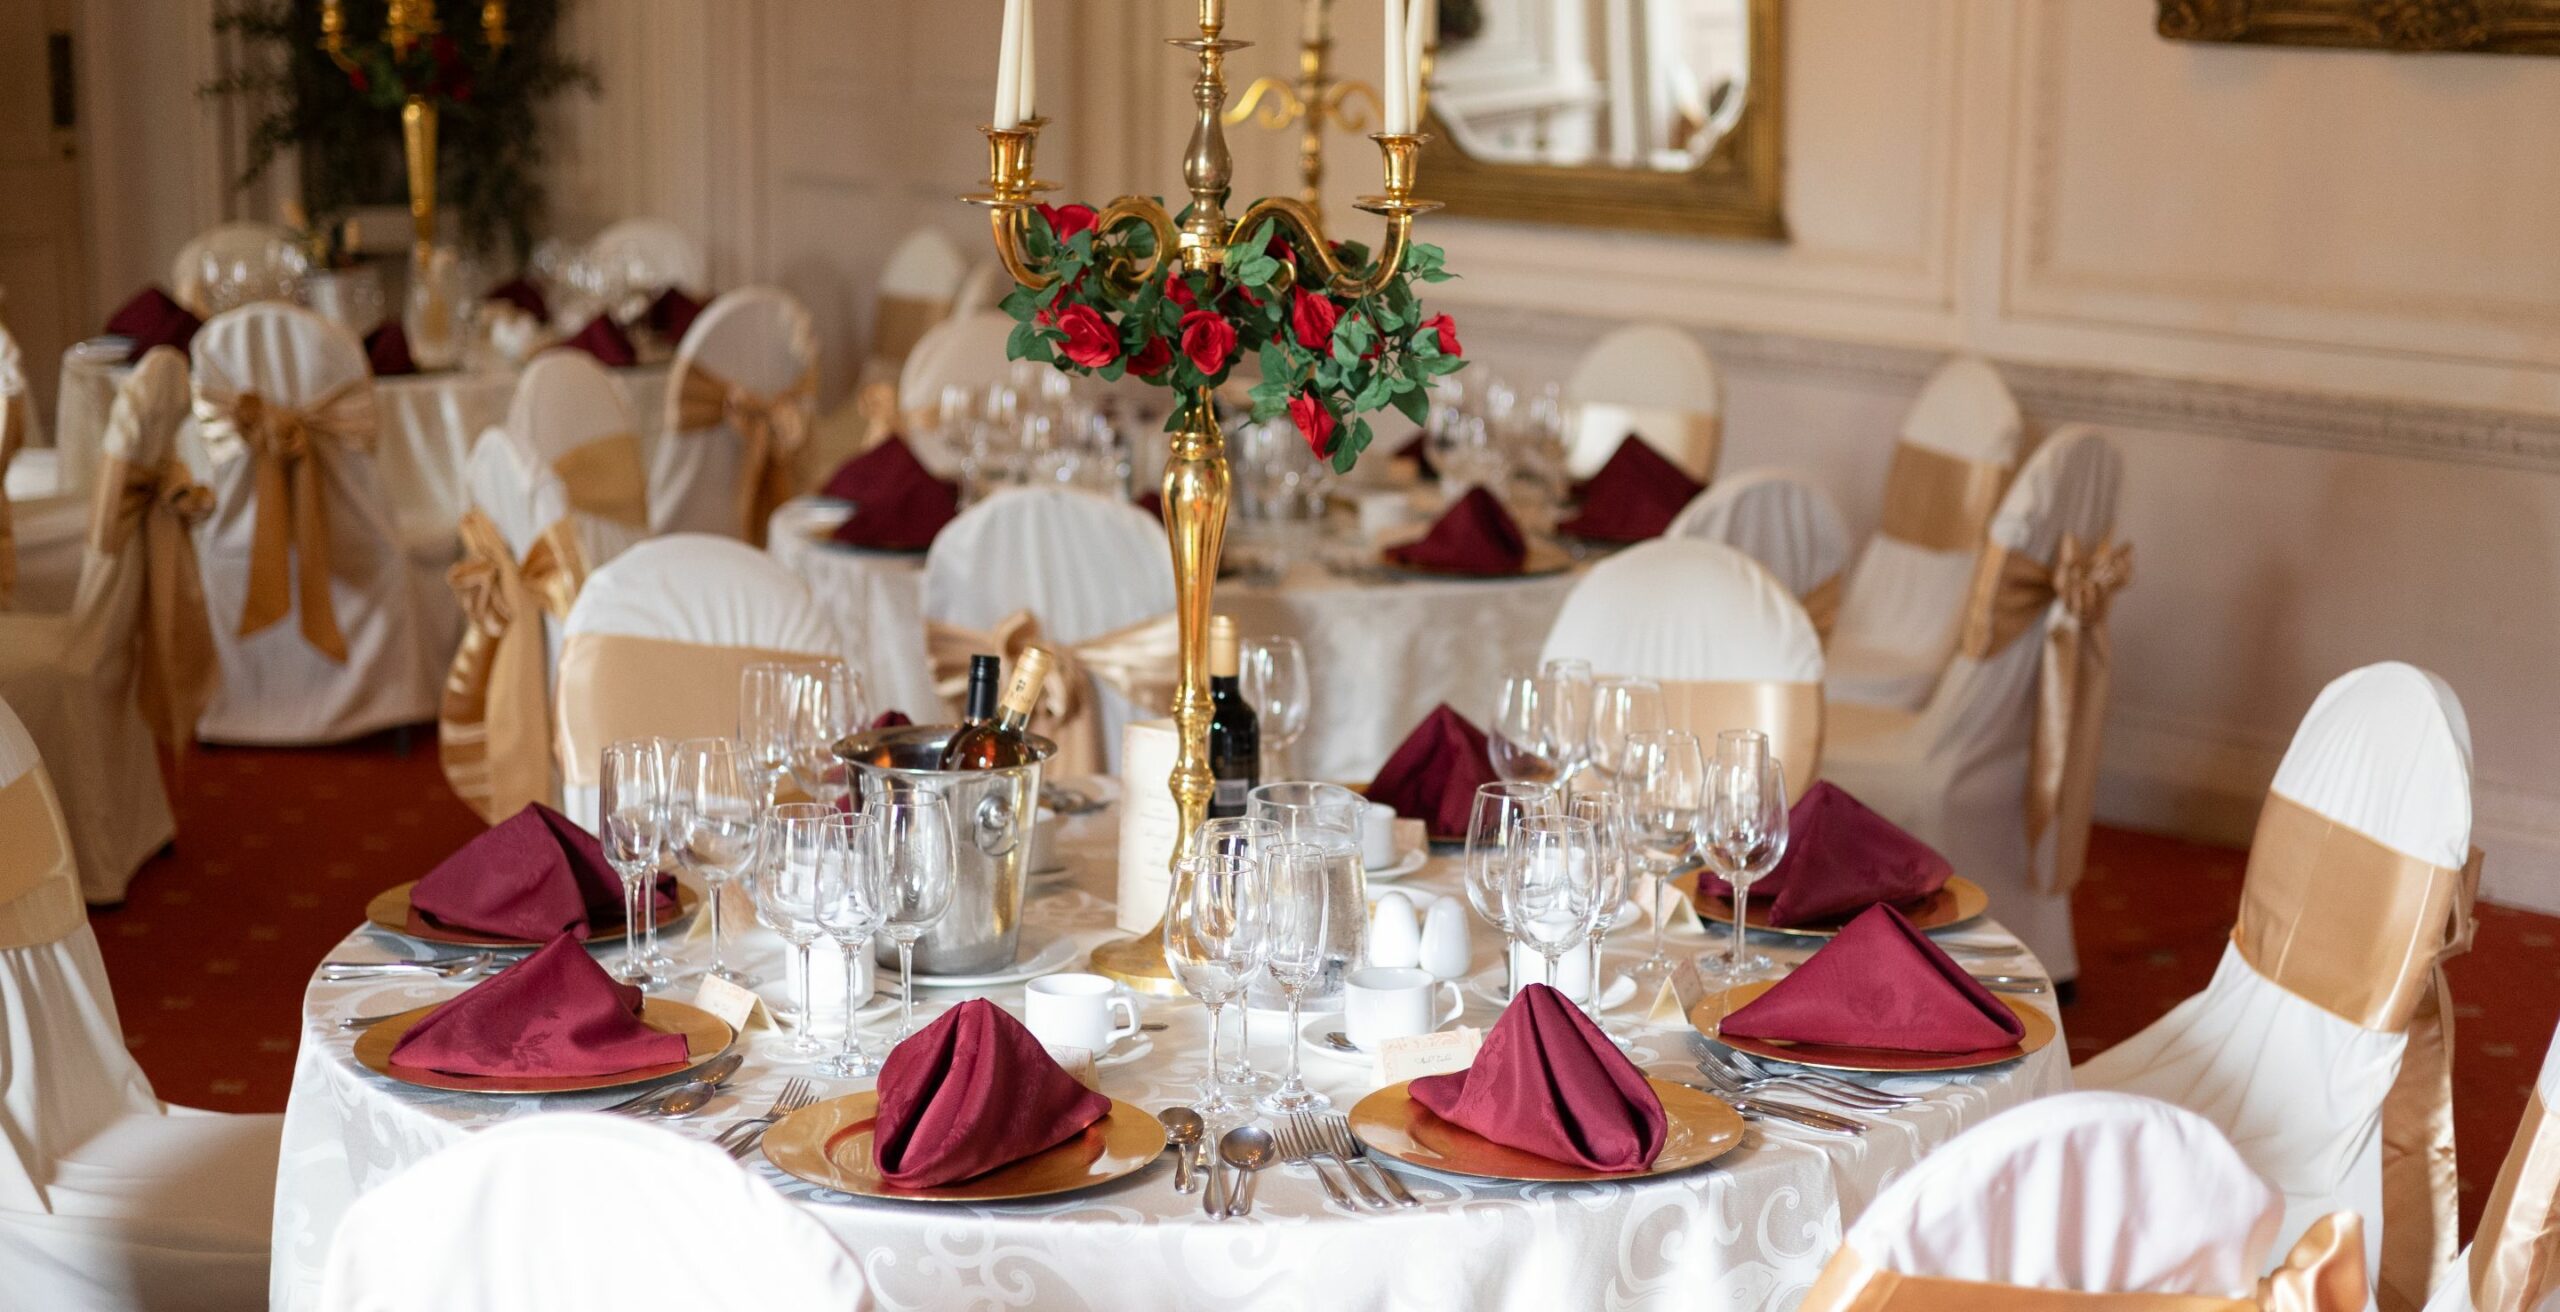 Affordable wedding venue at Coombe Abbey, picture shows a picturesque table setting 